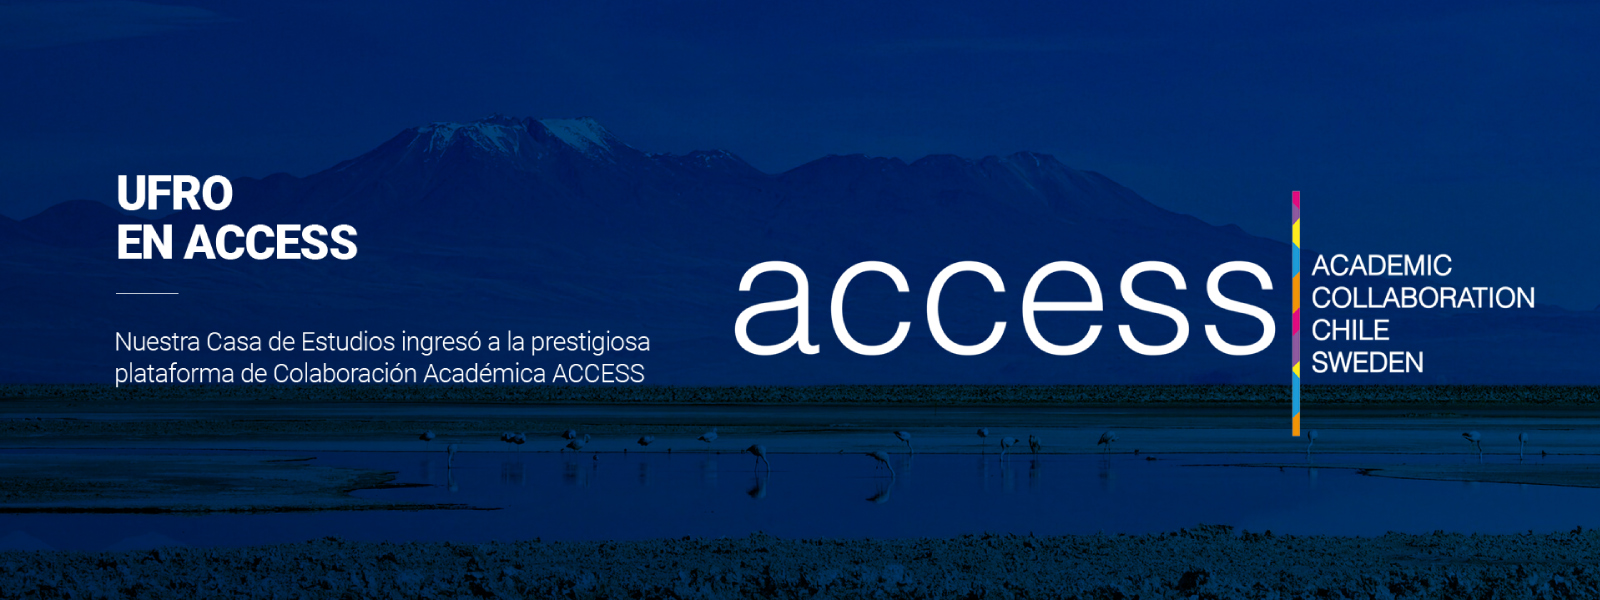 ACCESS UFRO